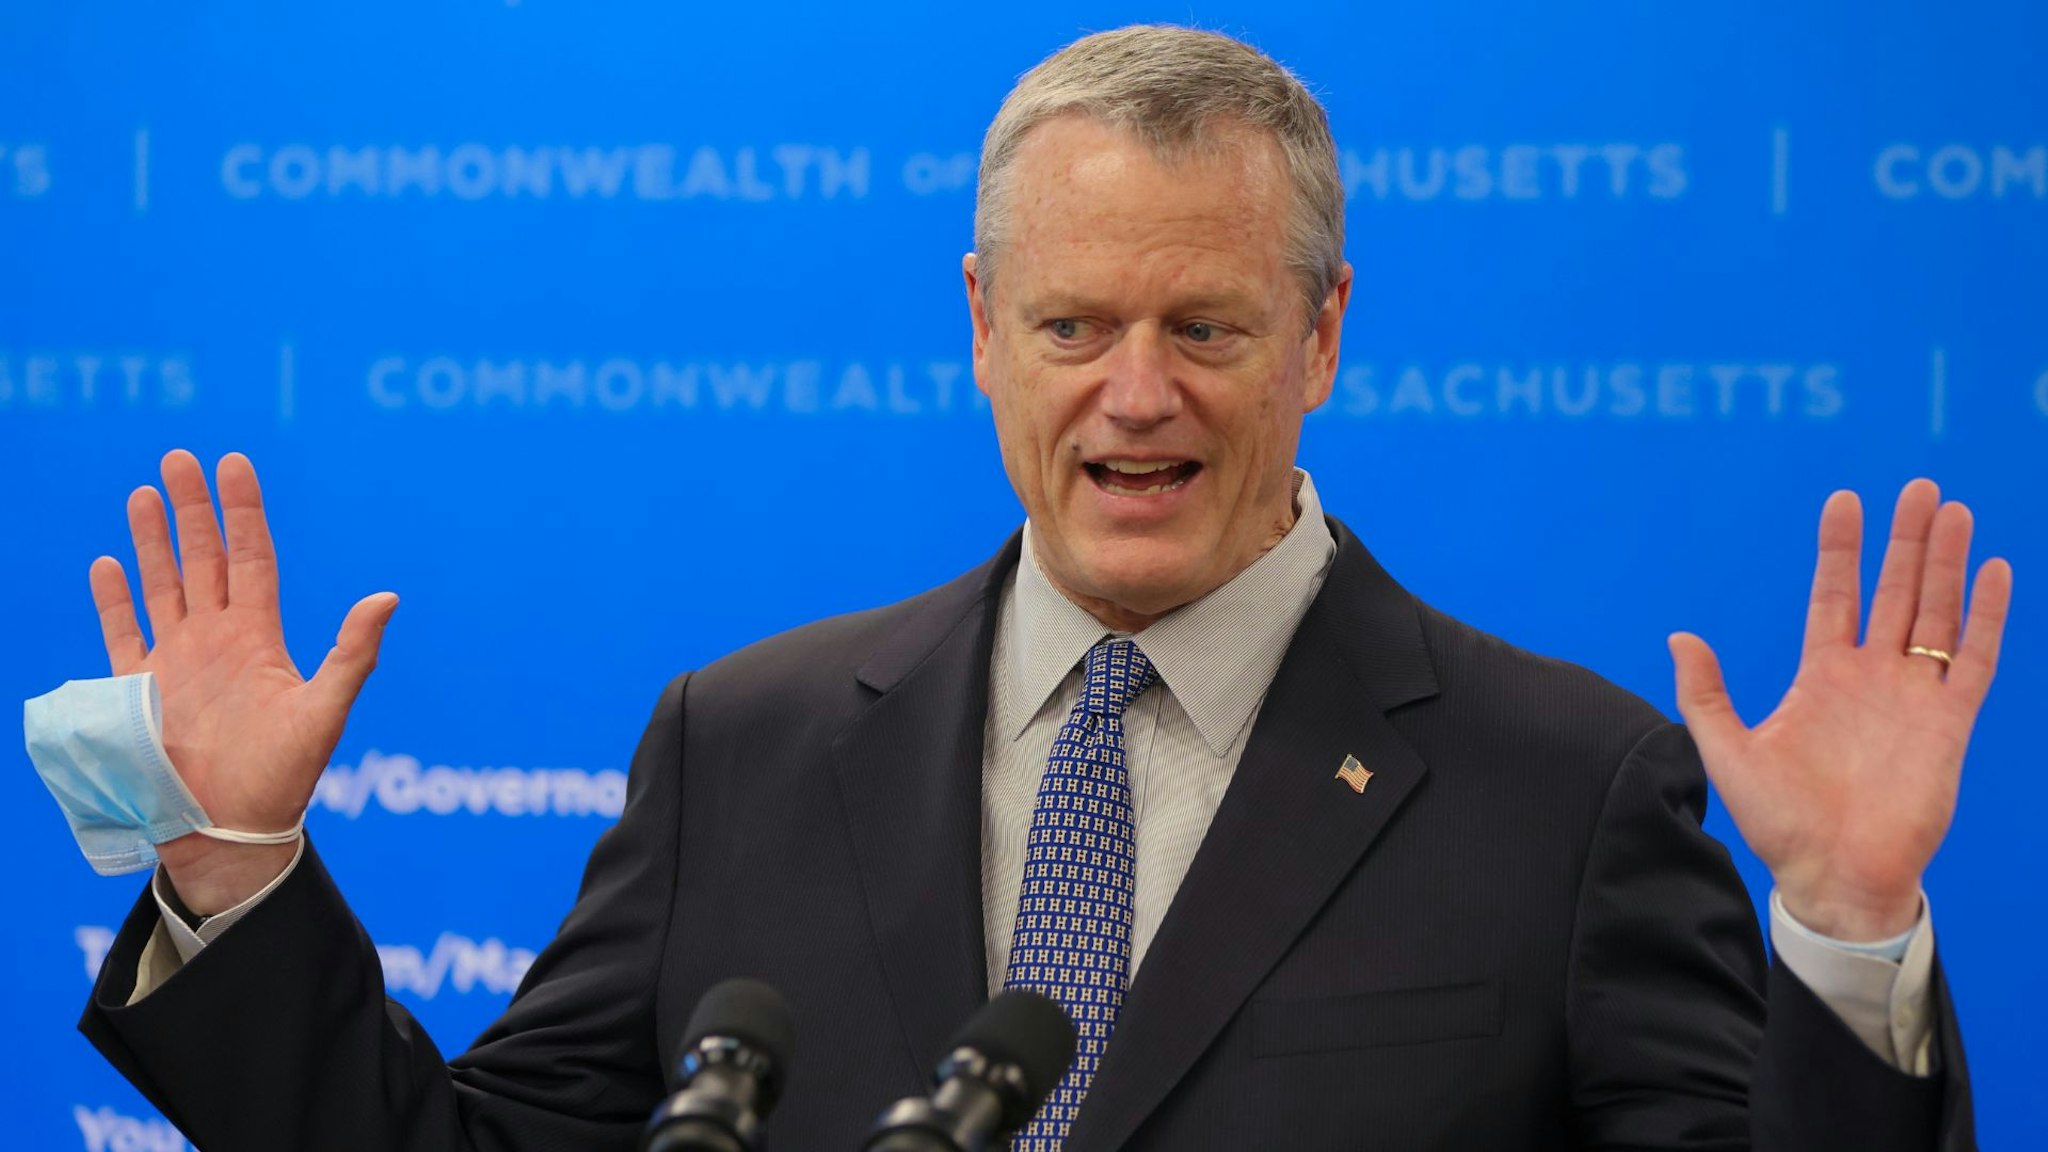 Quincy, MA - May 10: Governor Charlie Baker during a press conference at the Manet Community Health Center Vaccination Site in Quincy, MA on May 10, 2021.